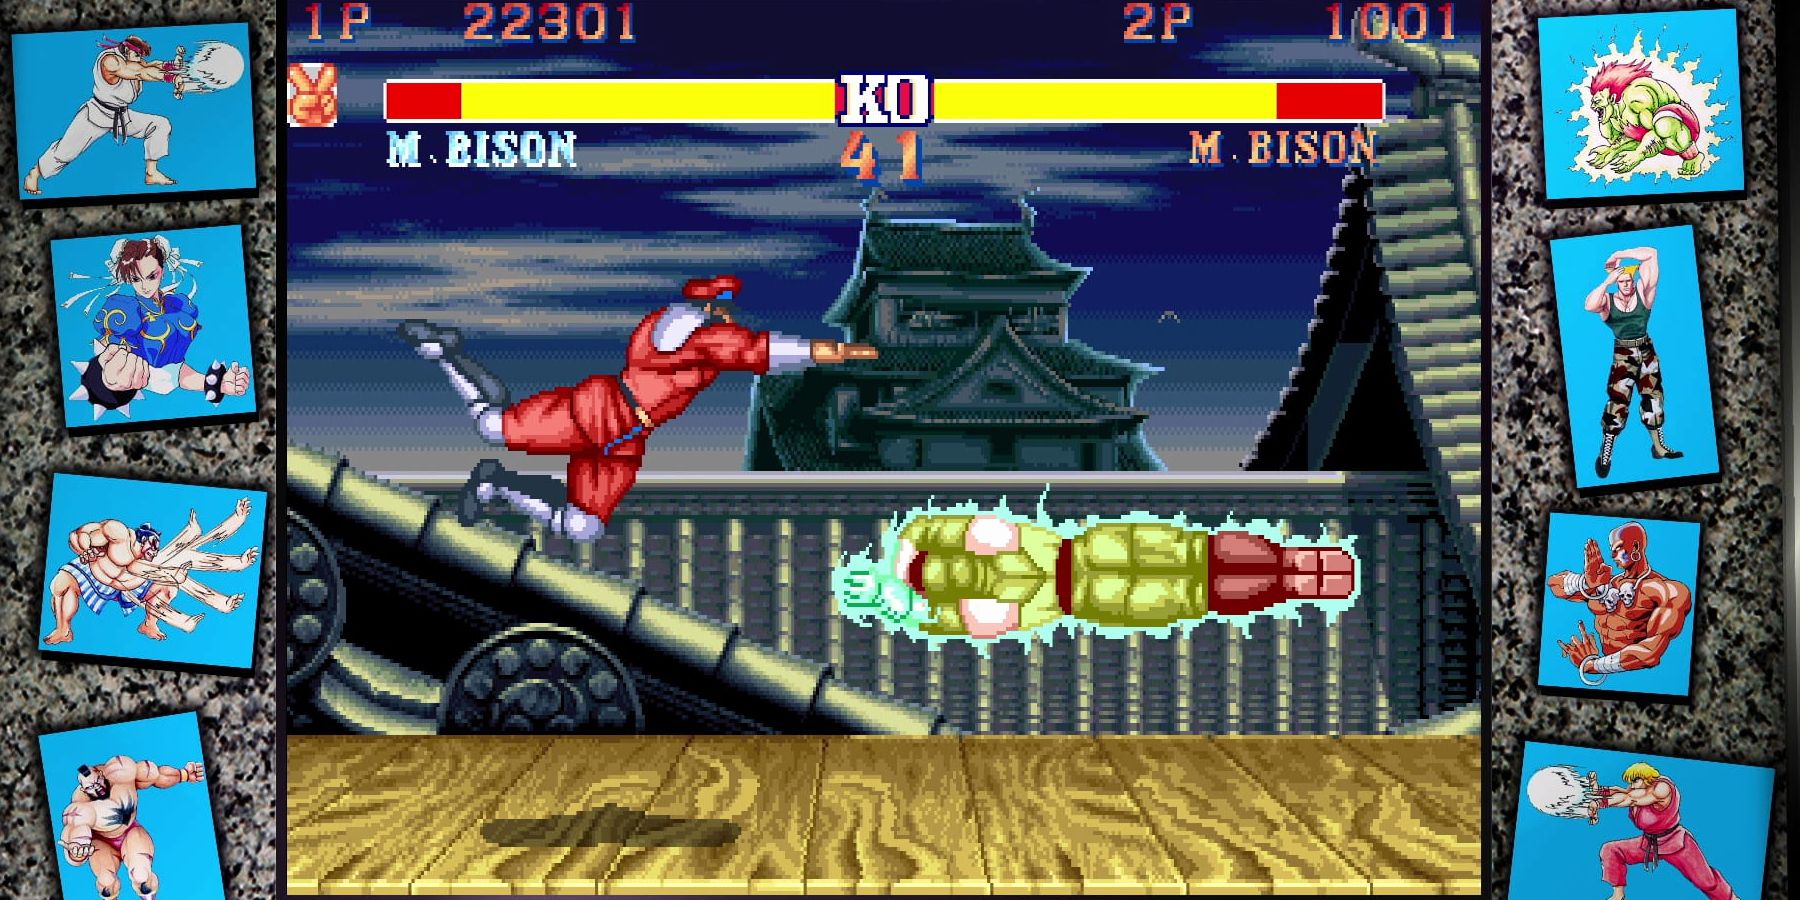 M. Bison mirror match plays out in Street Fighter II: Champion Edition